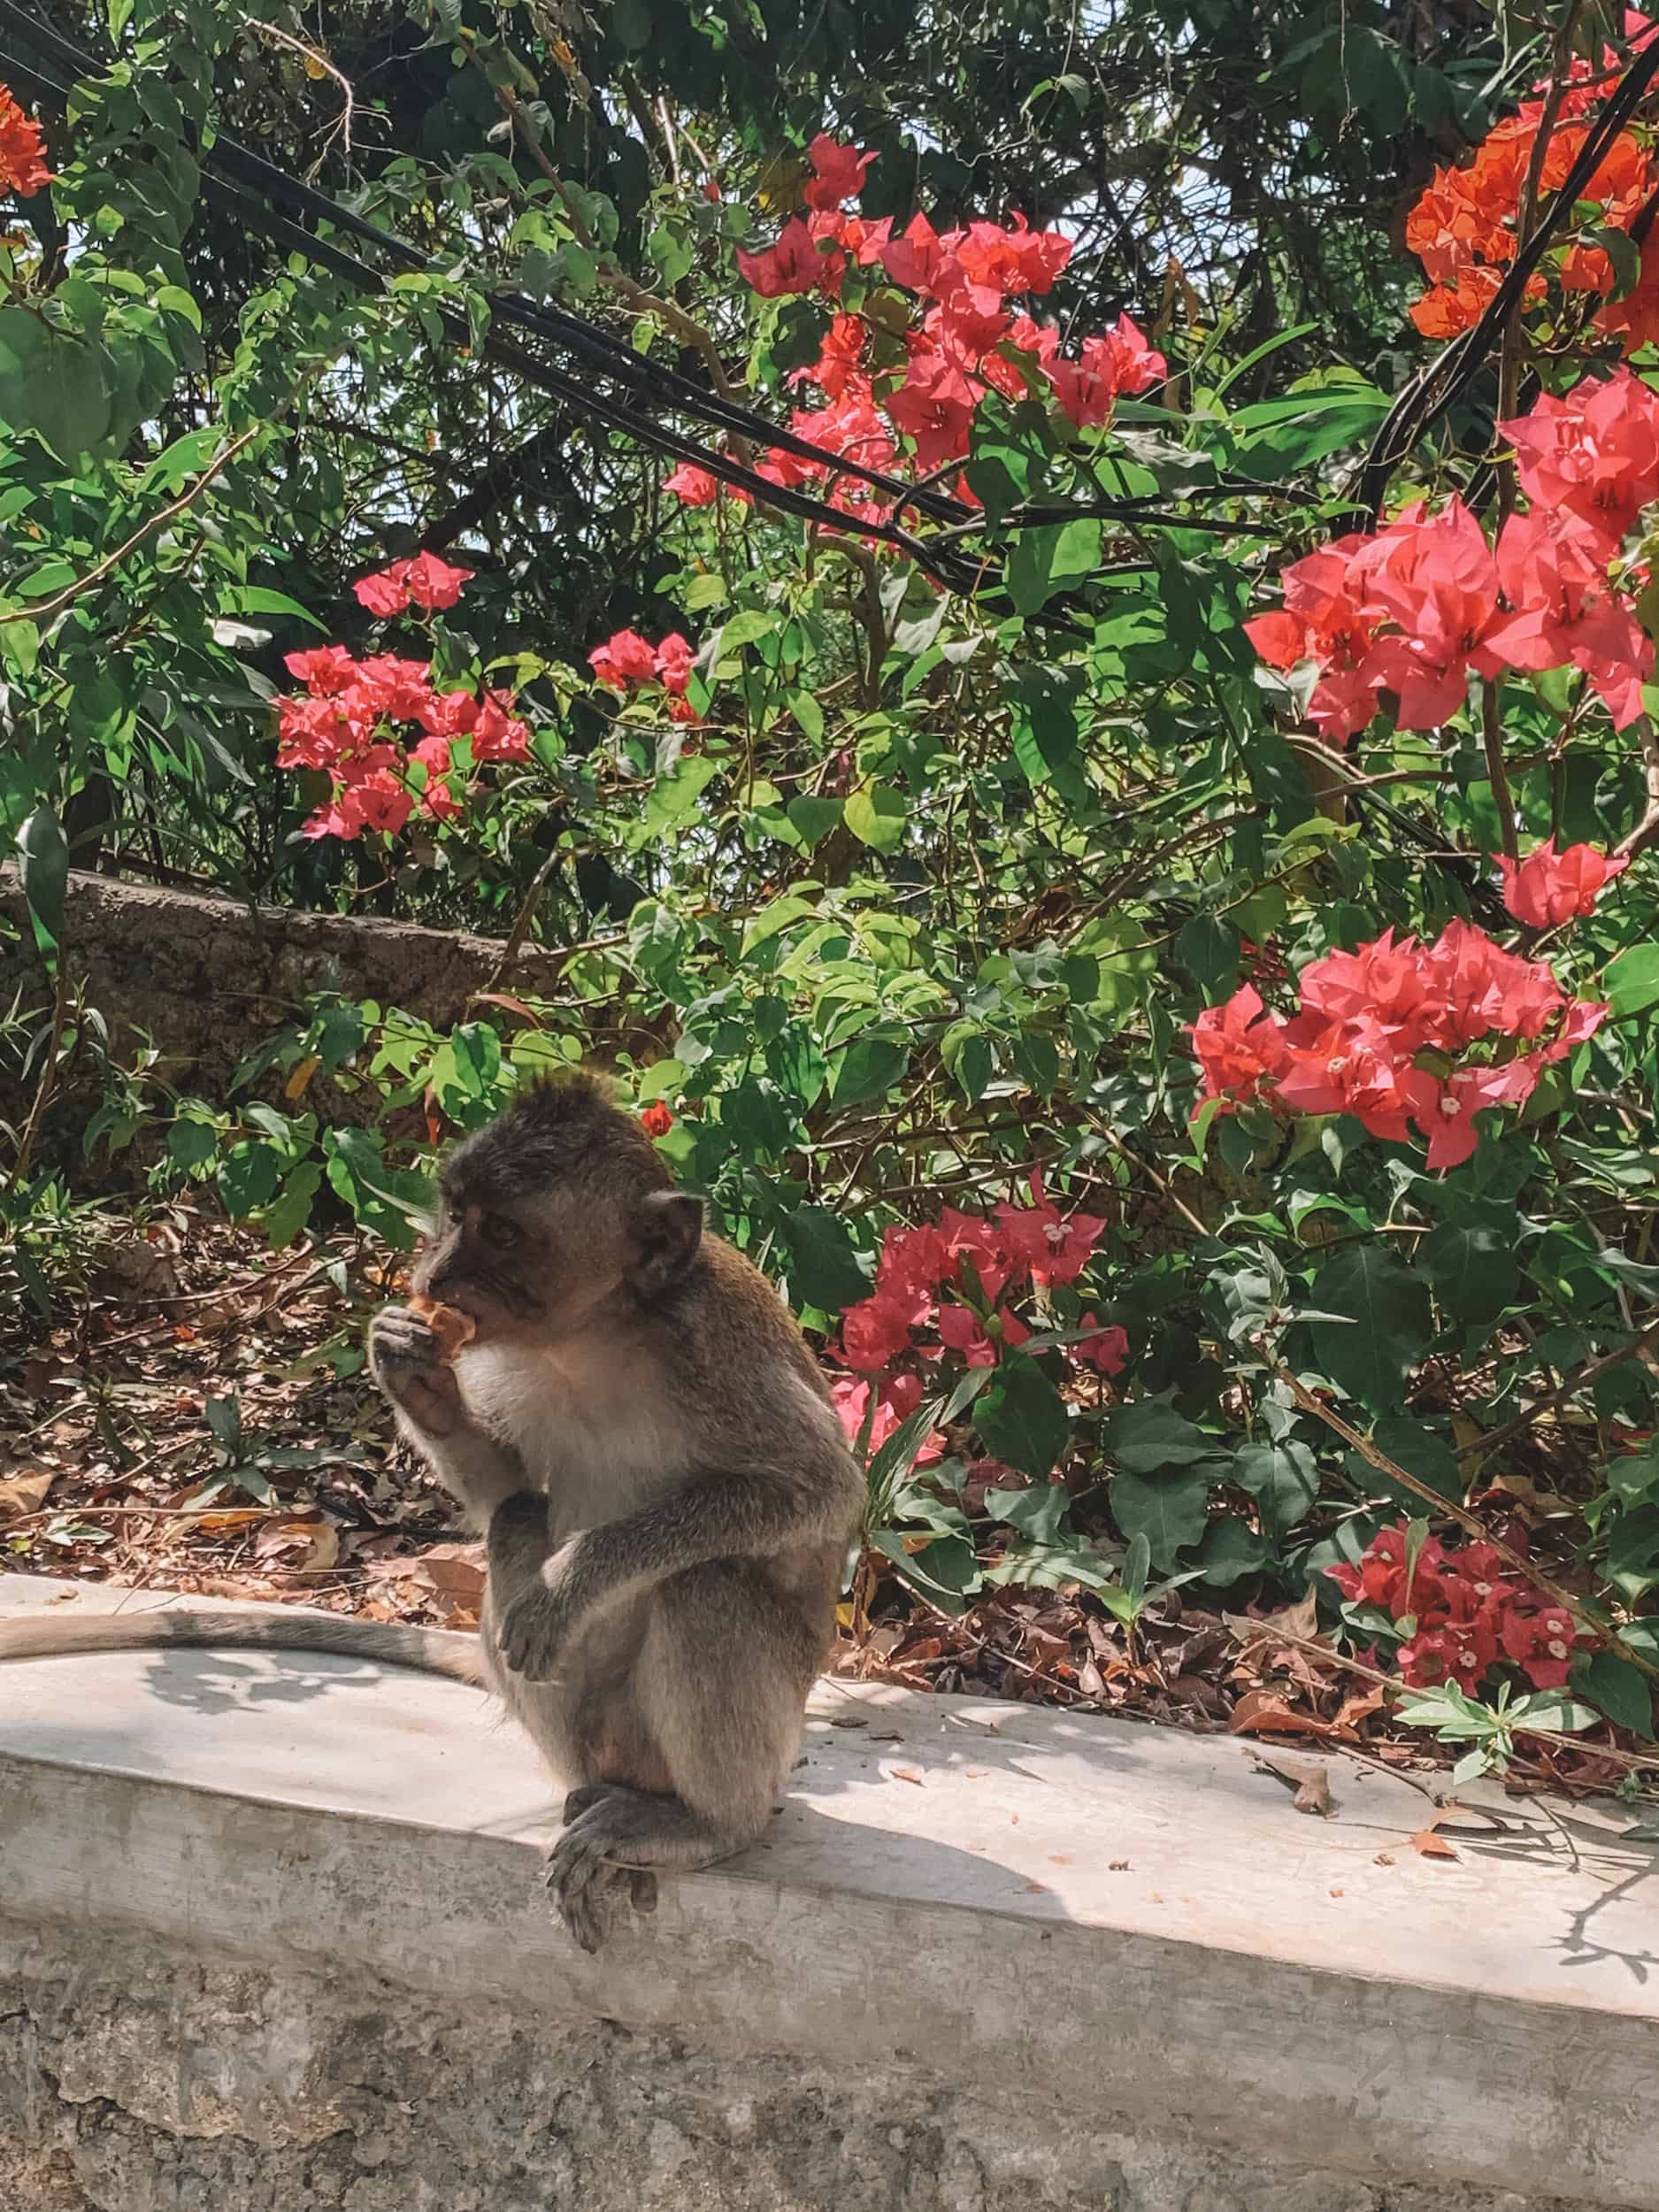 A Bali monkey is sitting on a ledge eating a piece of sweet potato. There are pink flowers behind him